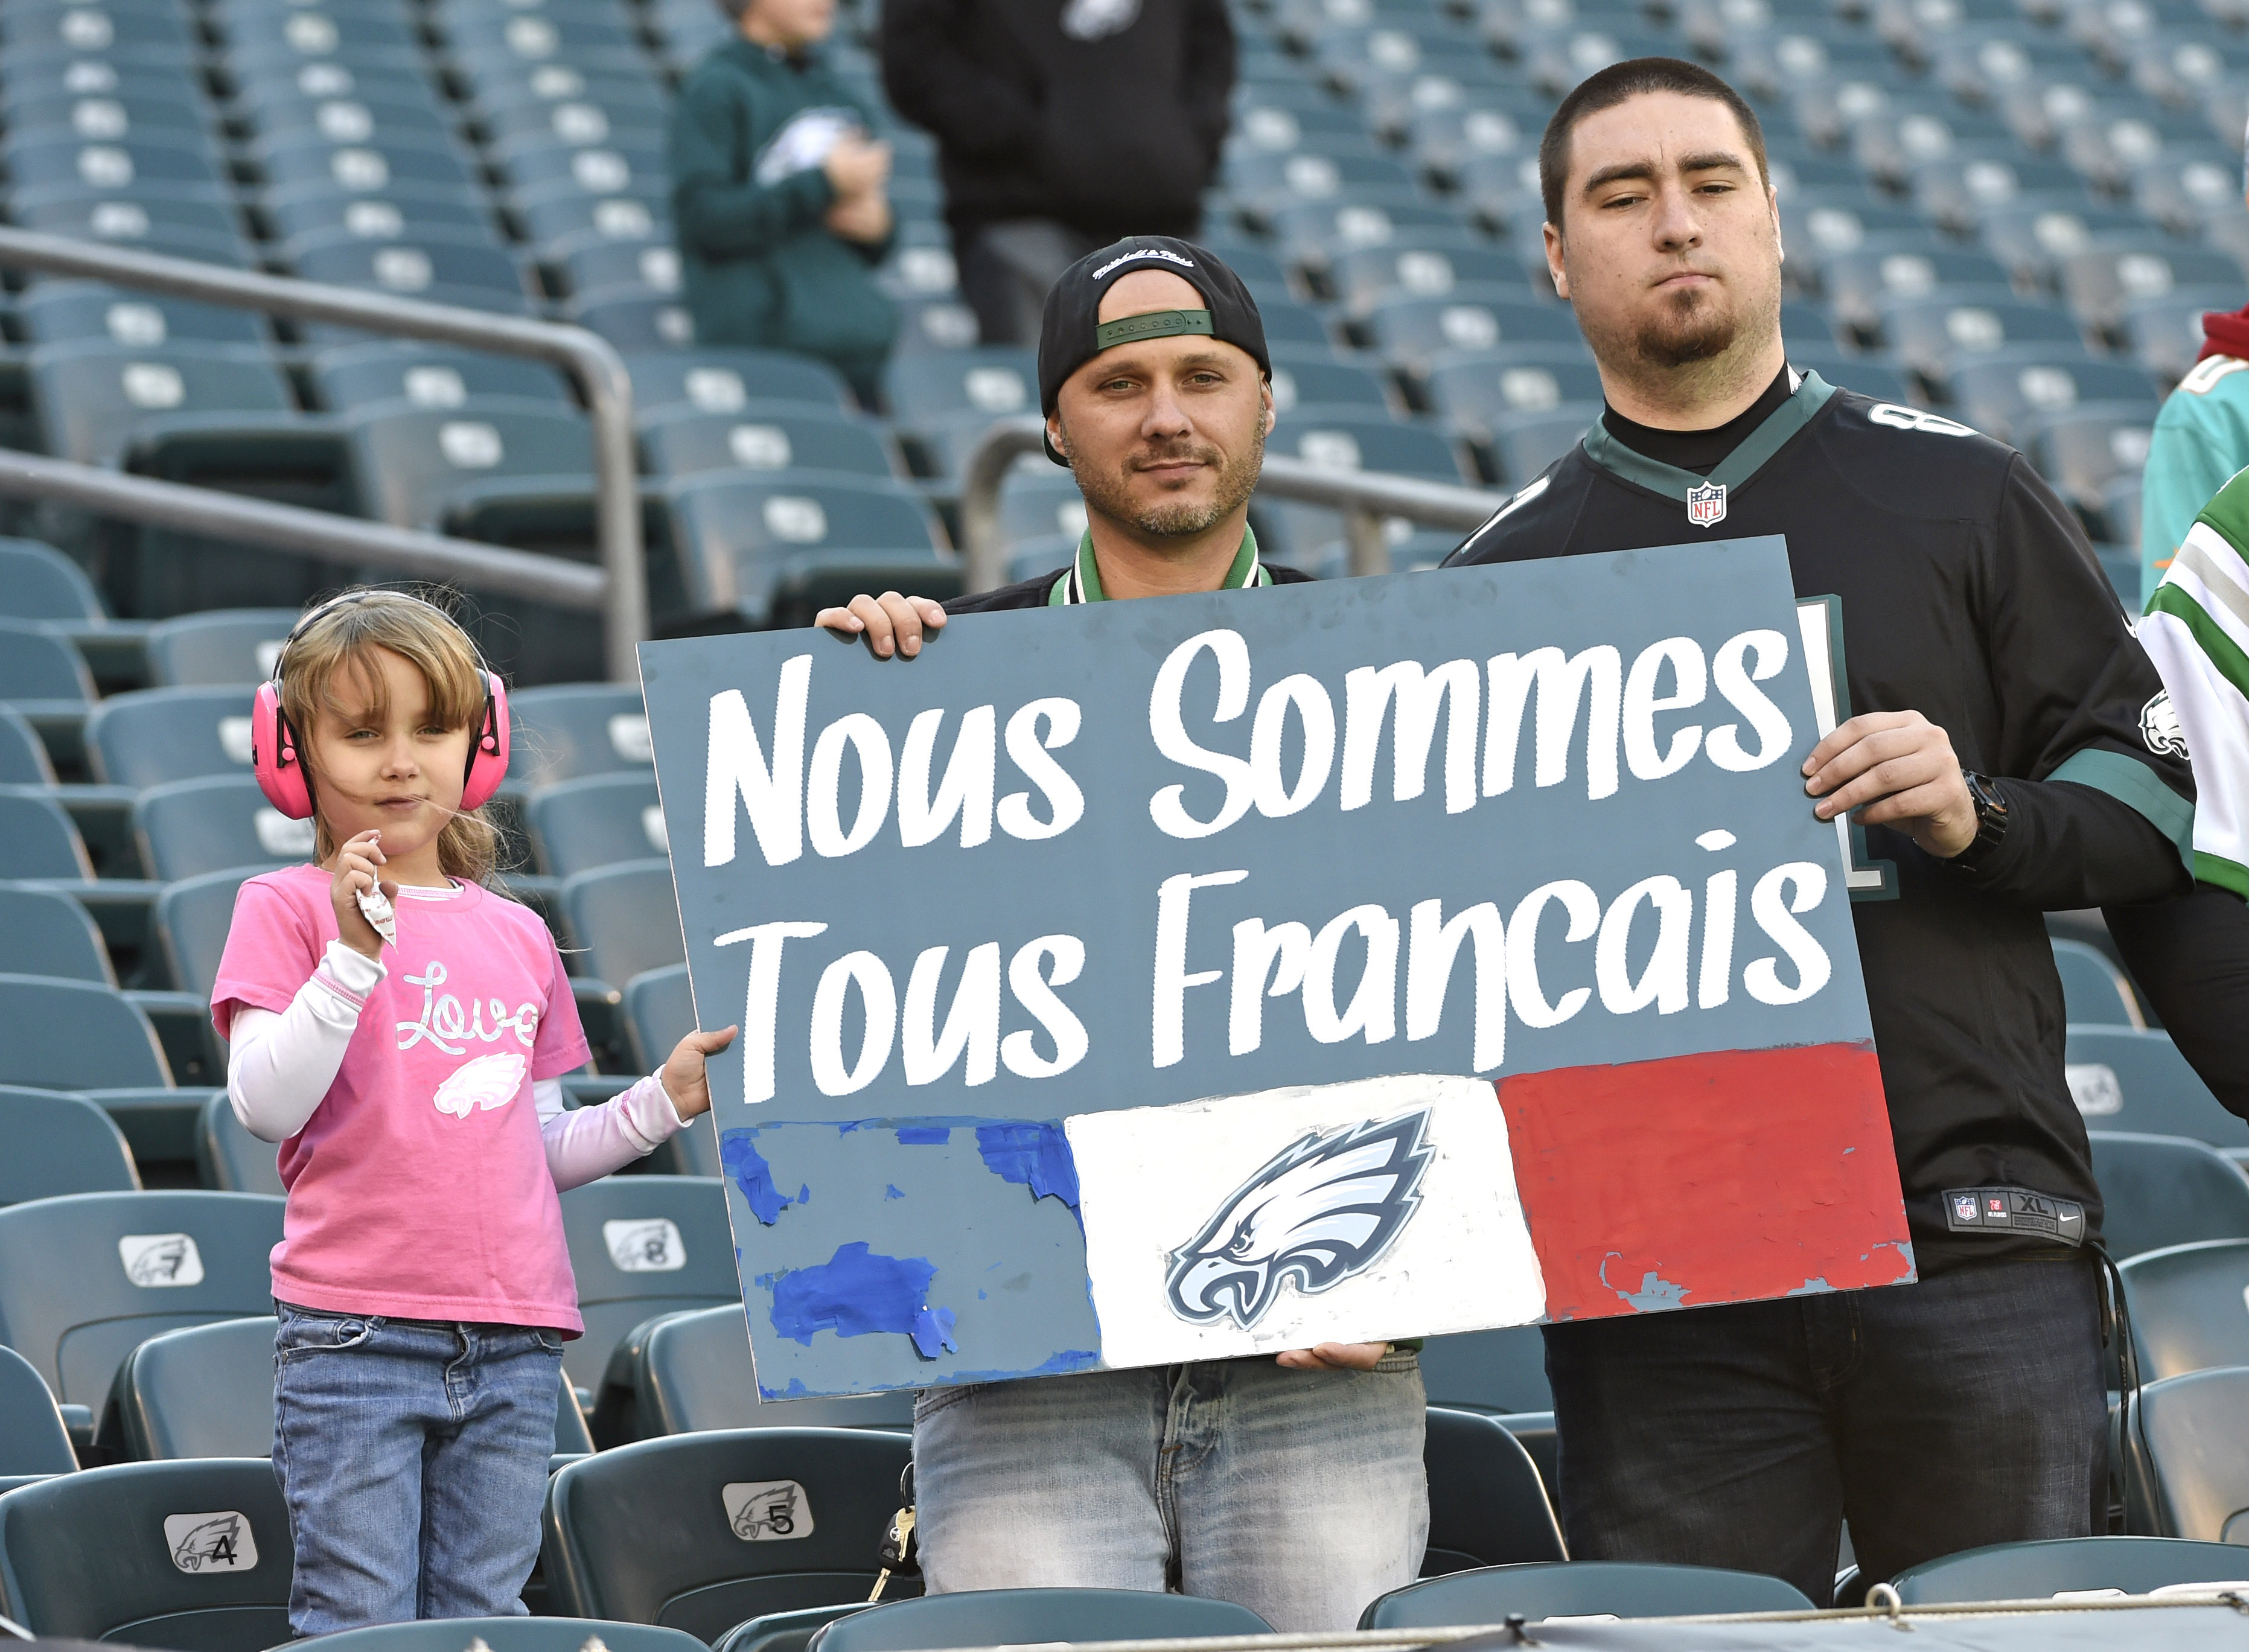 NFL stadiums touching tributes to French terror attack victims For The picture